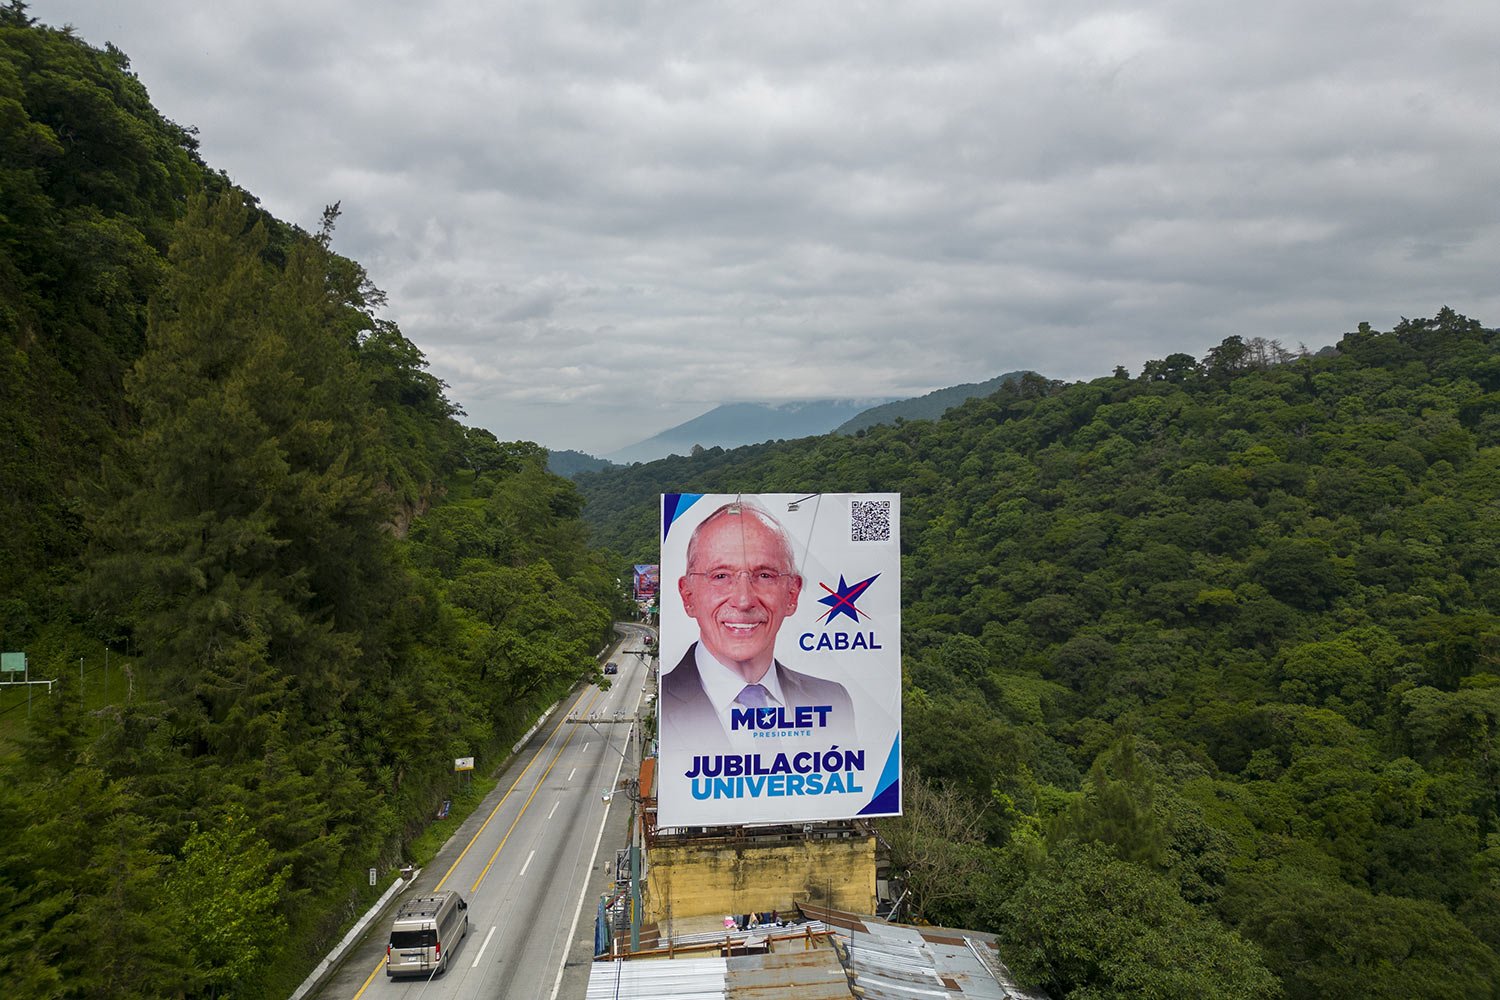  A campaign billboard promoting  Edmond Mulet, presidential candidate of the Cabal party, towers over a highway in Santa Lucia Milpas Altas, Guatemala, June 24, 2023. Guatemalans go to the polls on June 25. (AP Photo/Moises Castillo) 